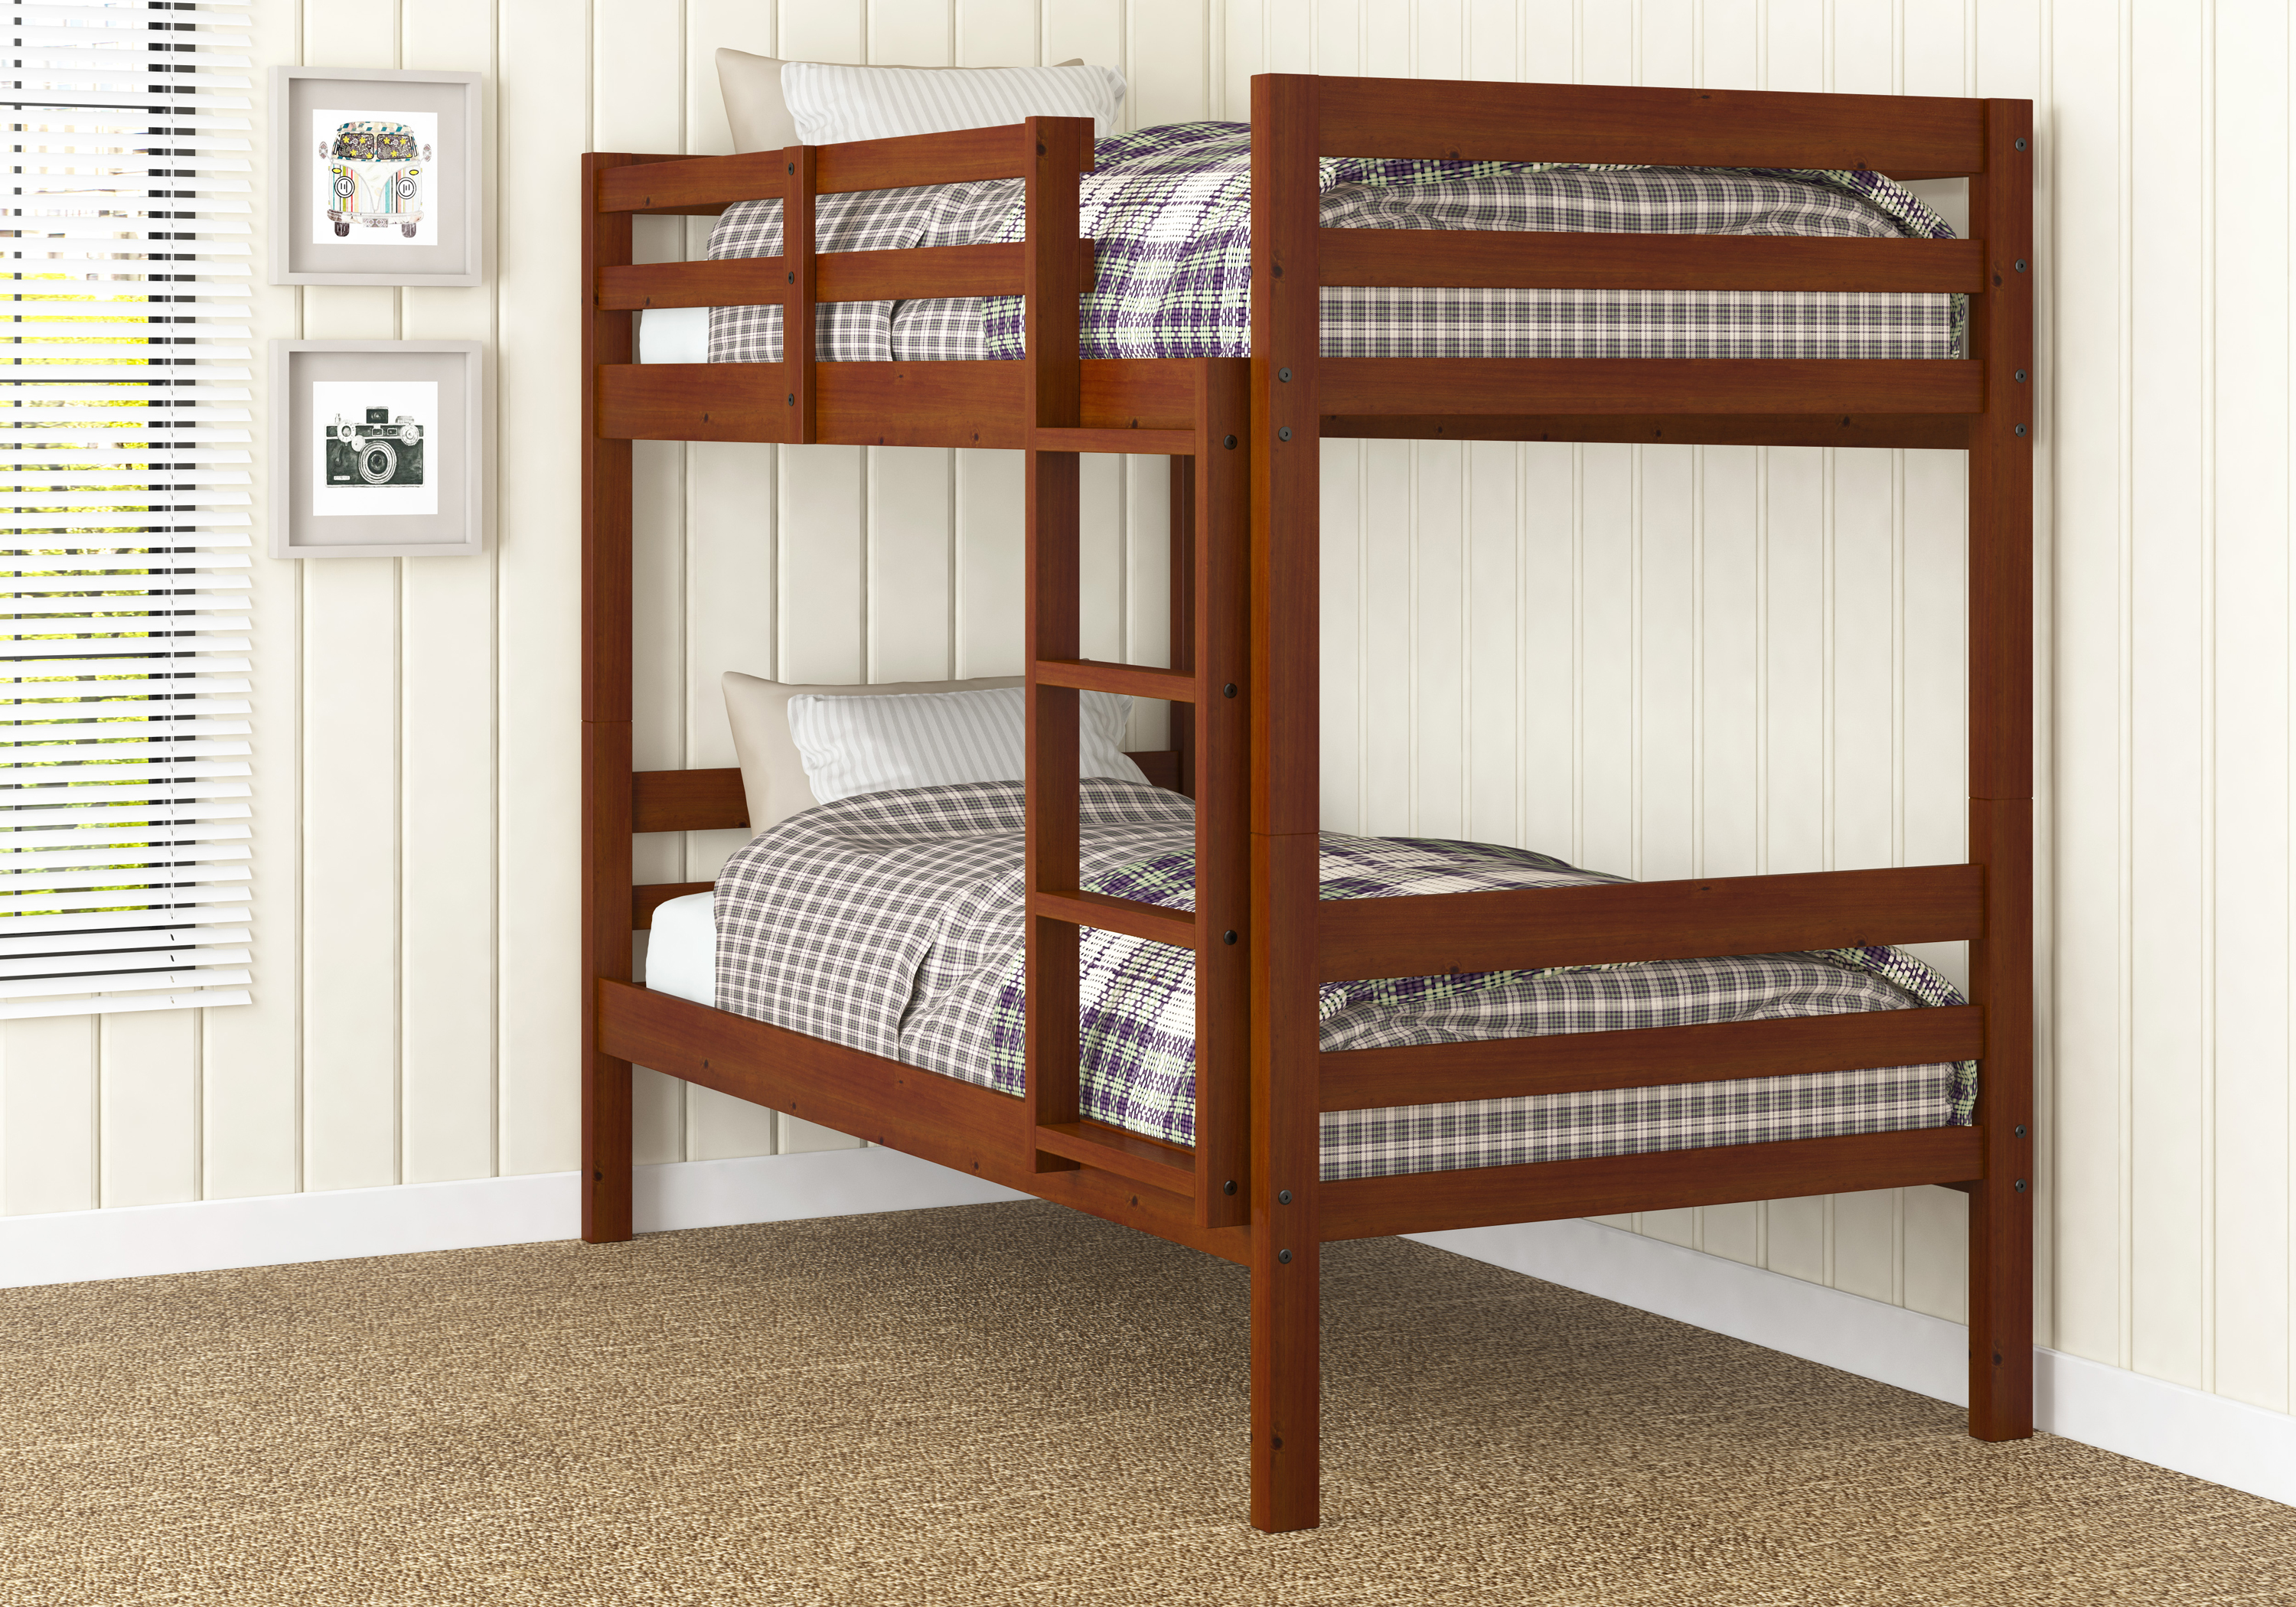 FixturesFirst PD-2004-E-TT Econo Ranch Twin Size Over Bunk Bed in Light Espresso